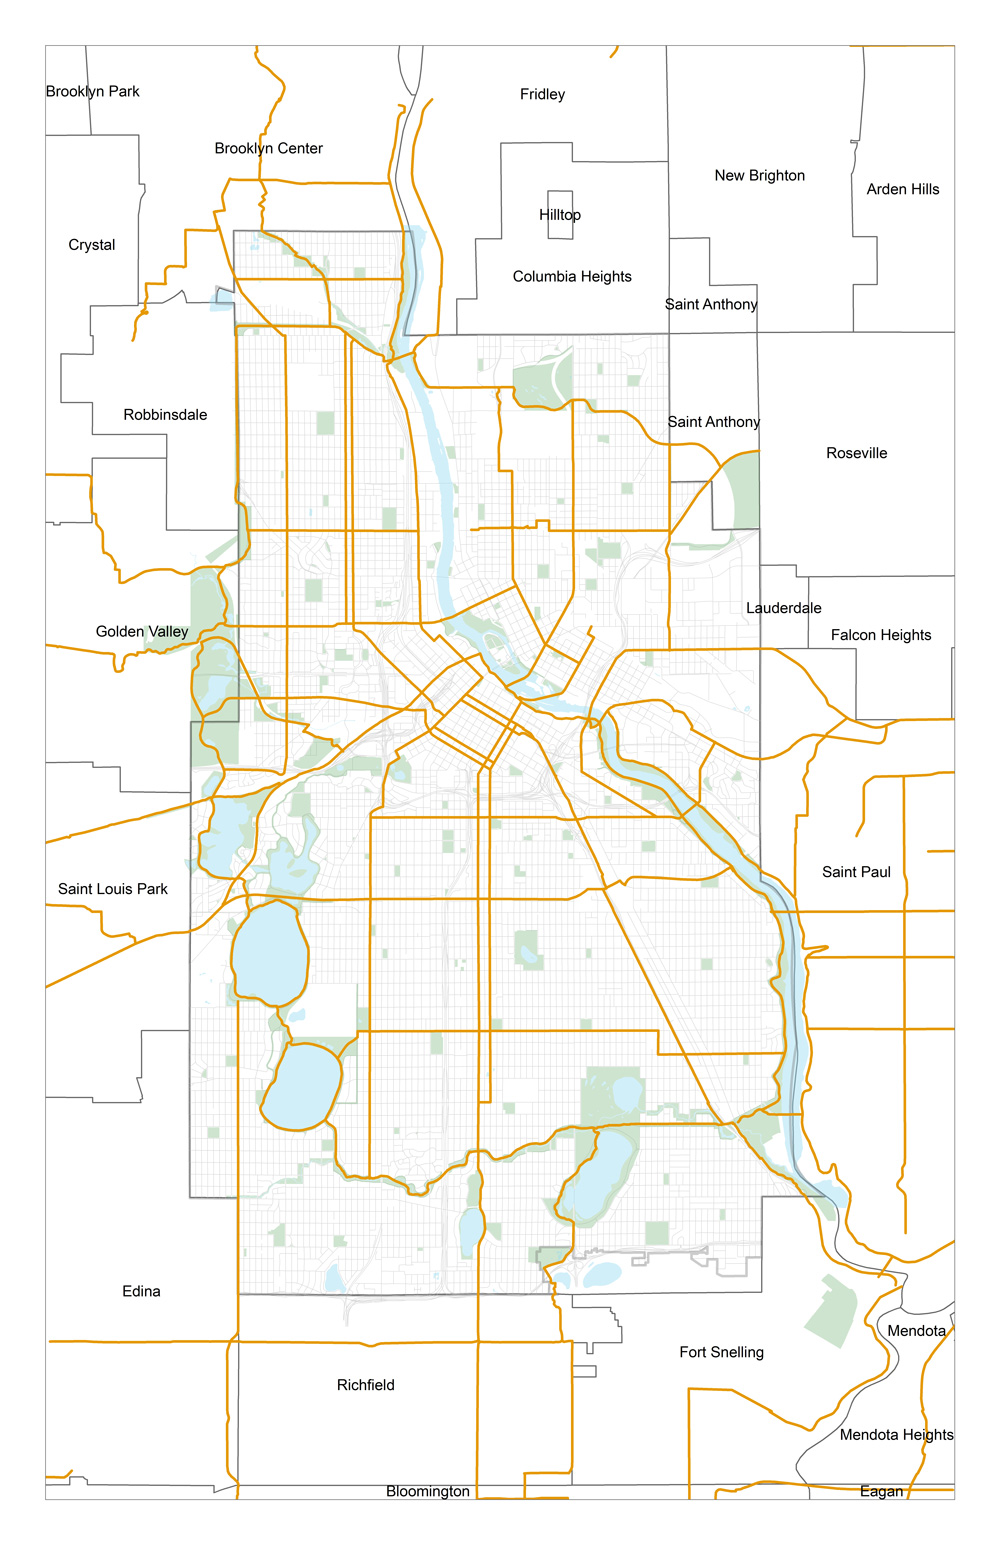 Existing Regional Bicycle Trail Network